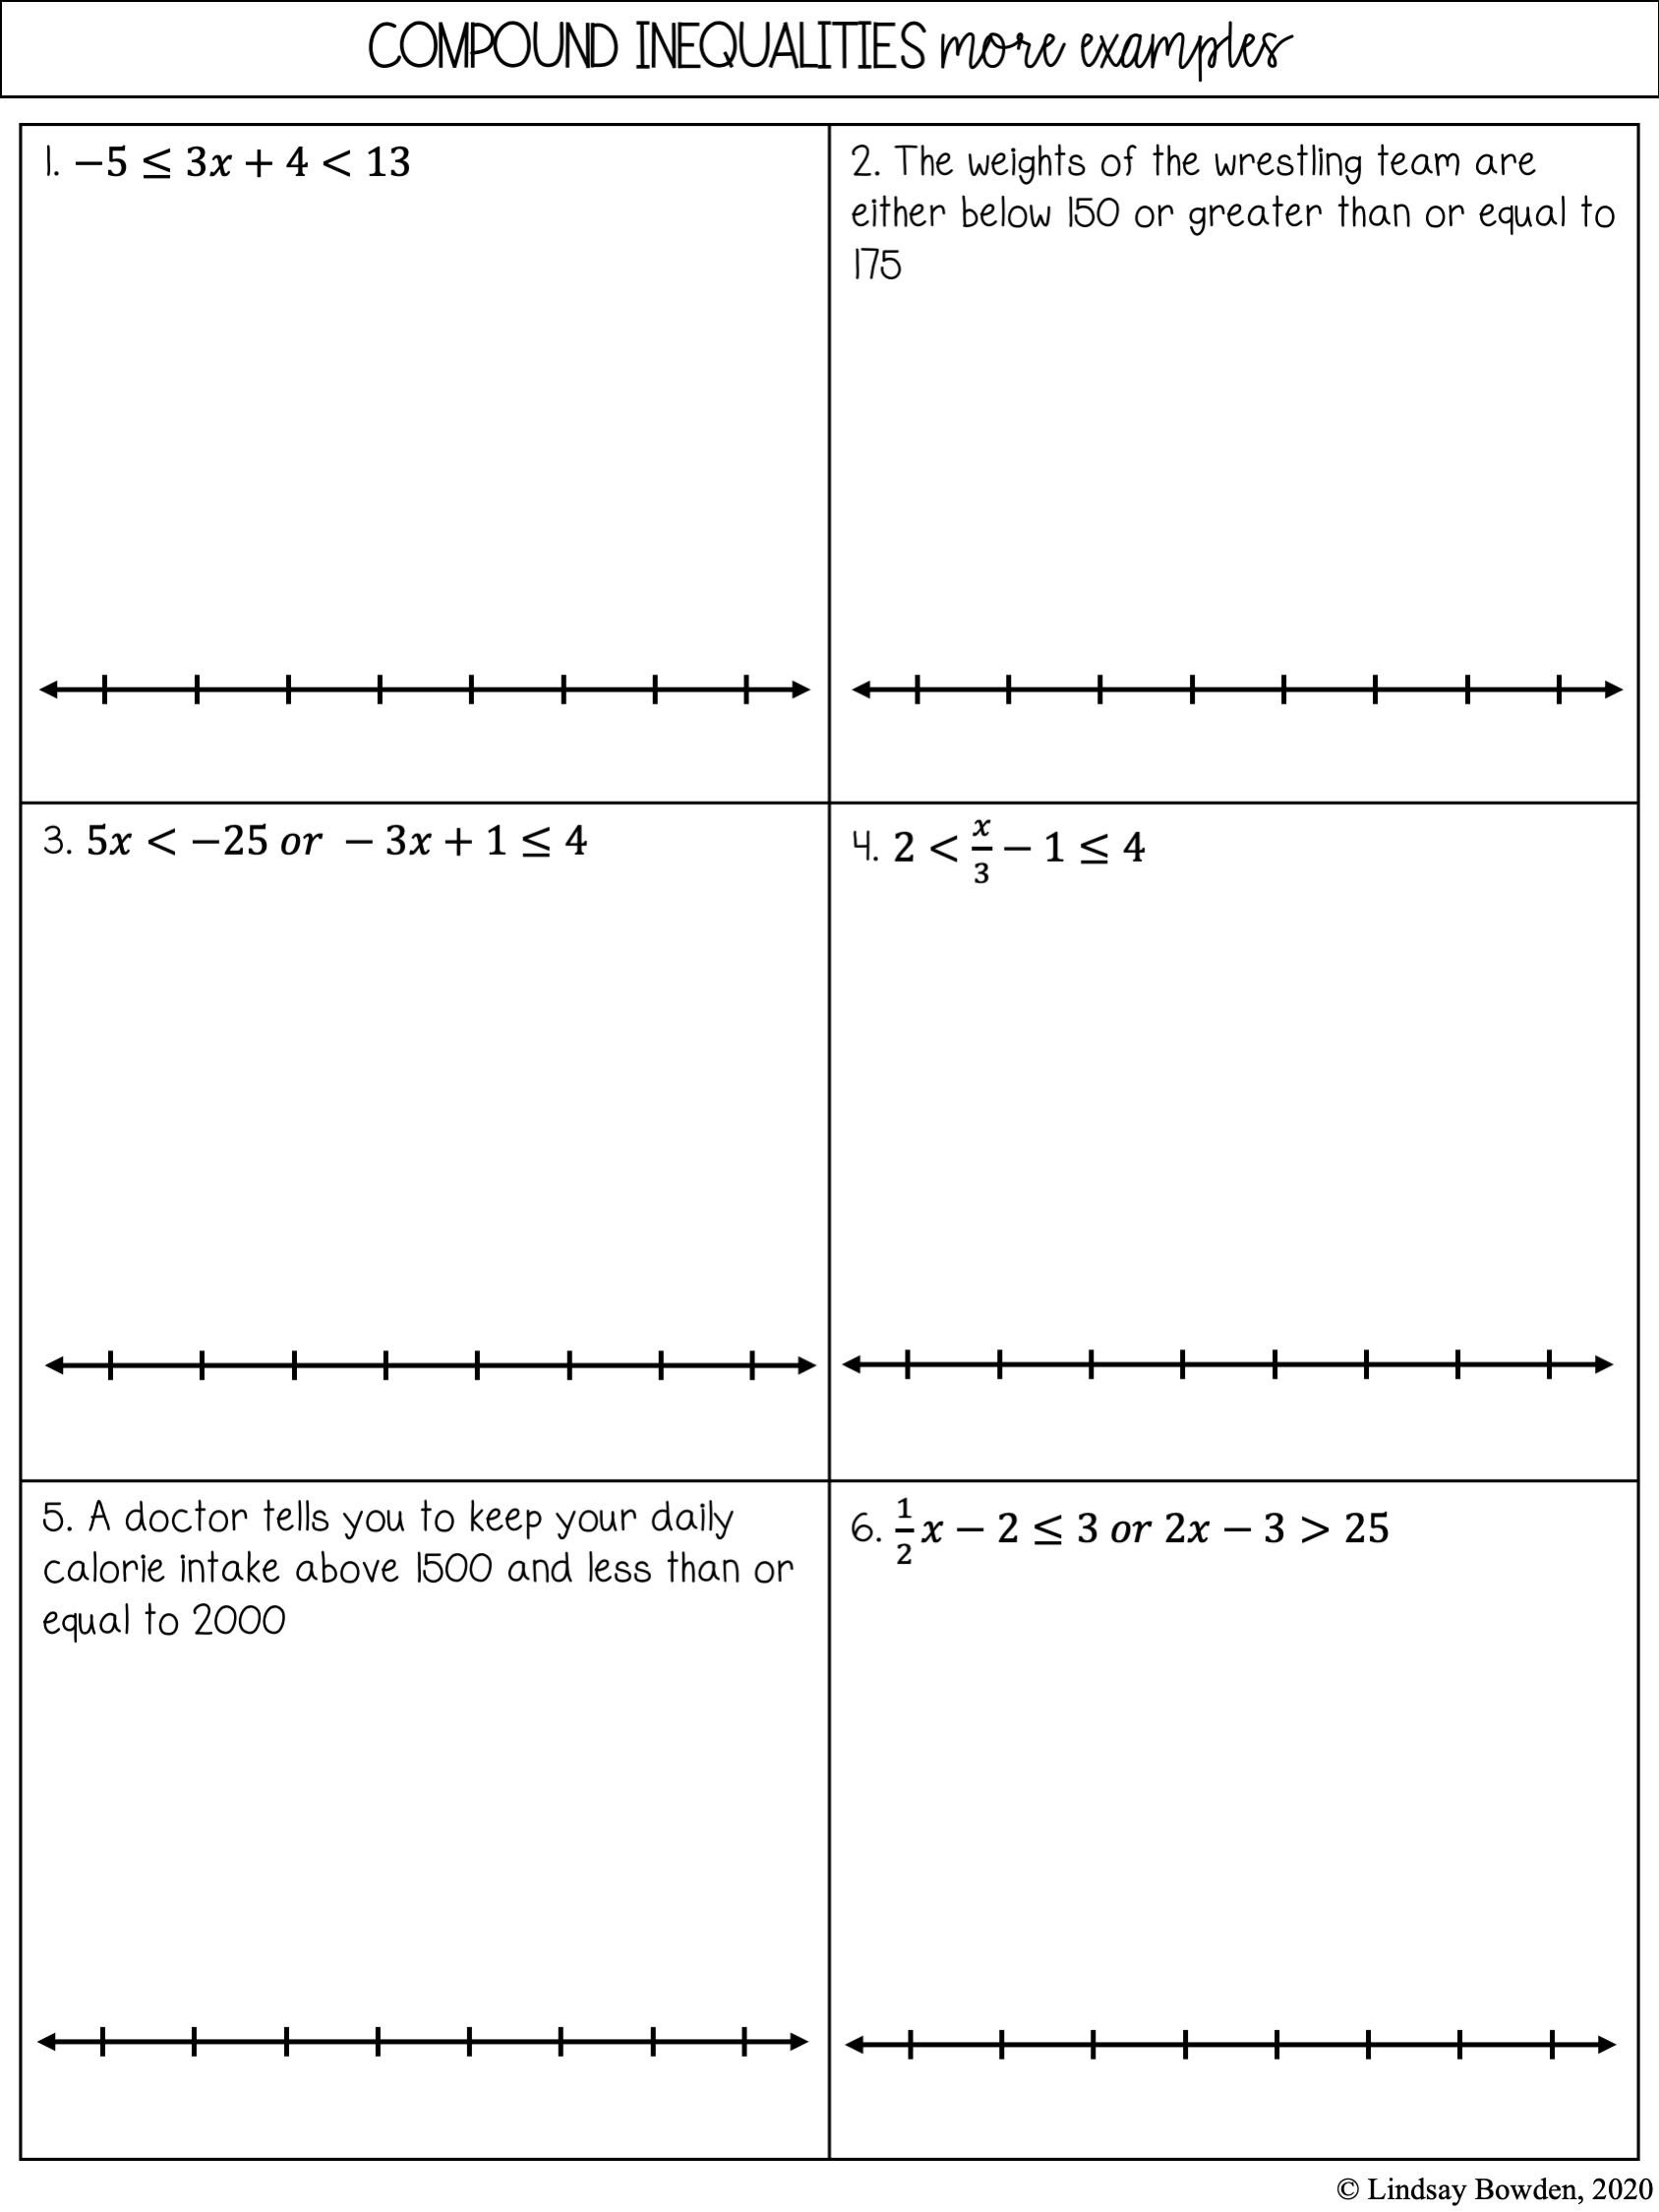 Compound Inequalities Notes and Worksheets - Lindsay Bowden Inside Compound Inequalities Worksheet Answers